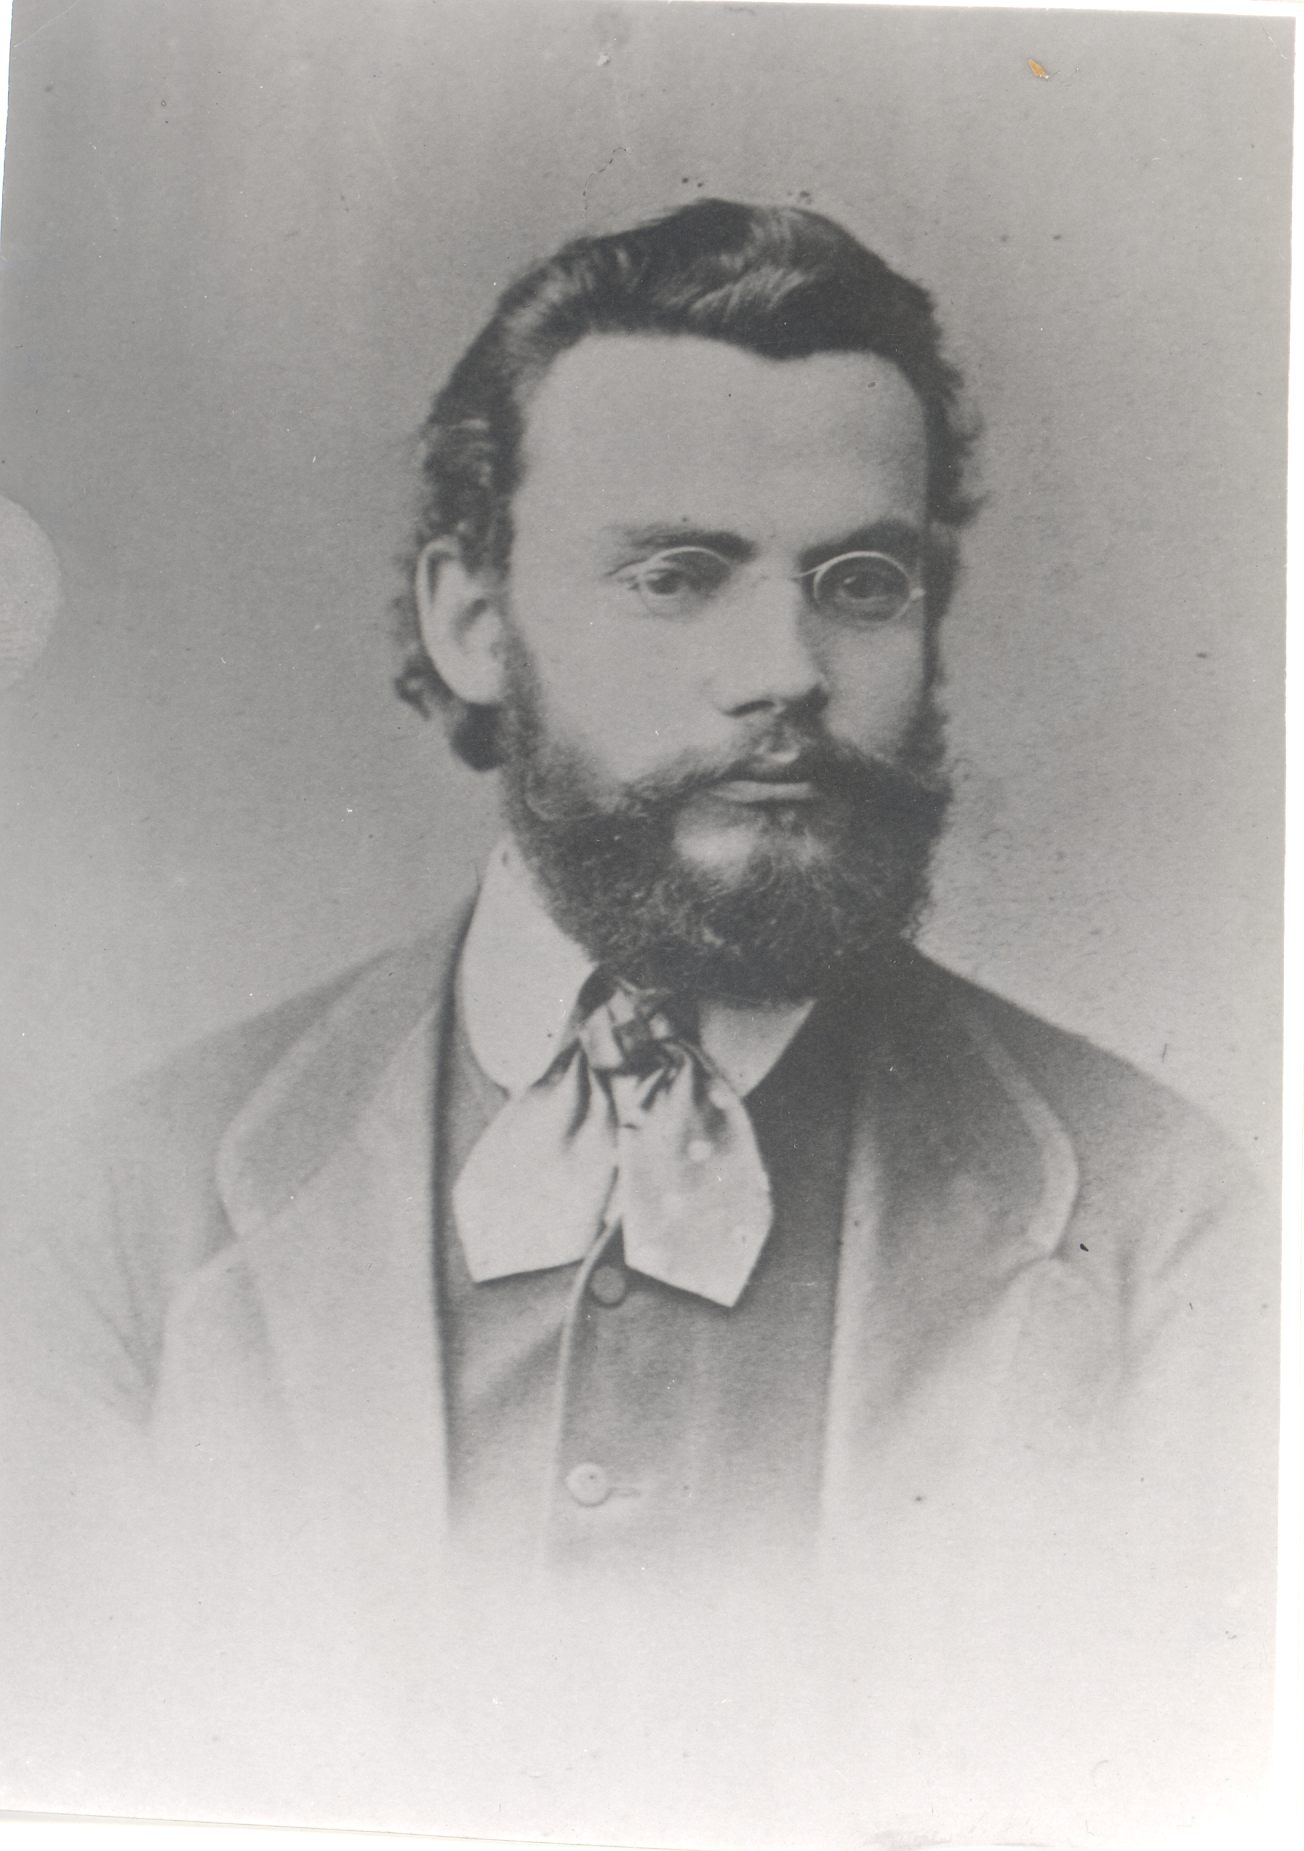 Jakobson, C. R. during his residence in Tallinn.